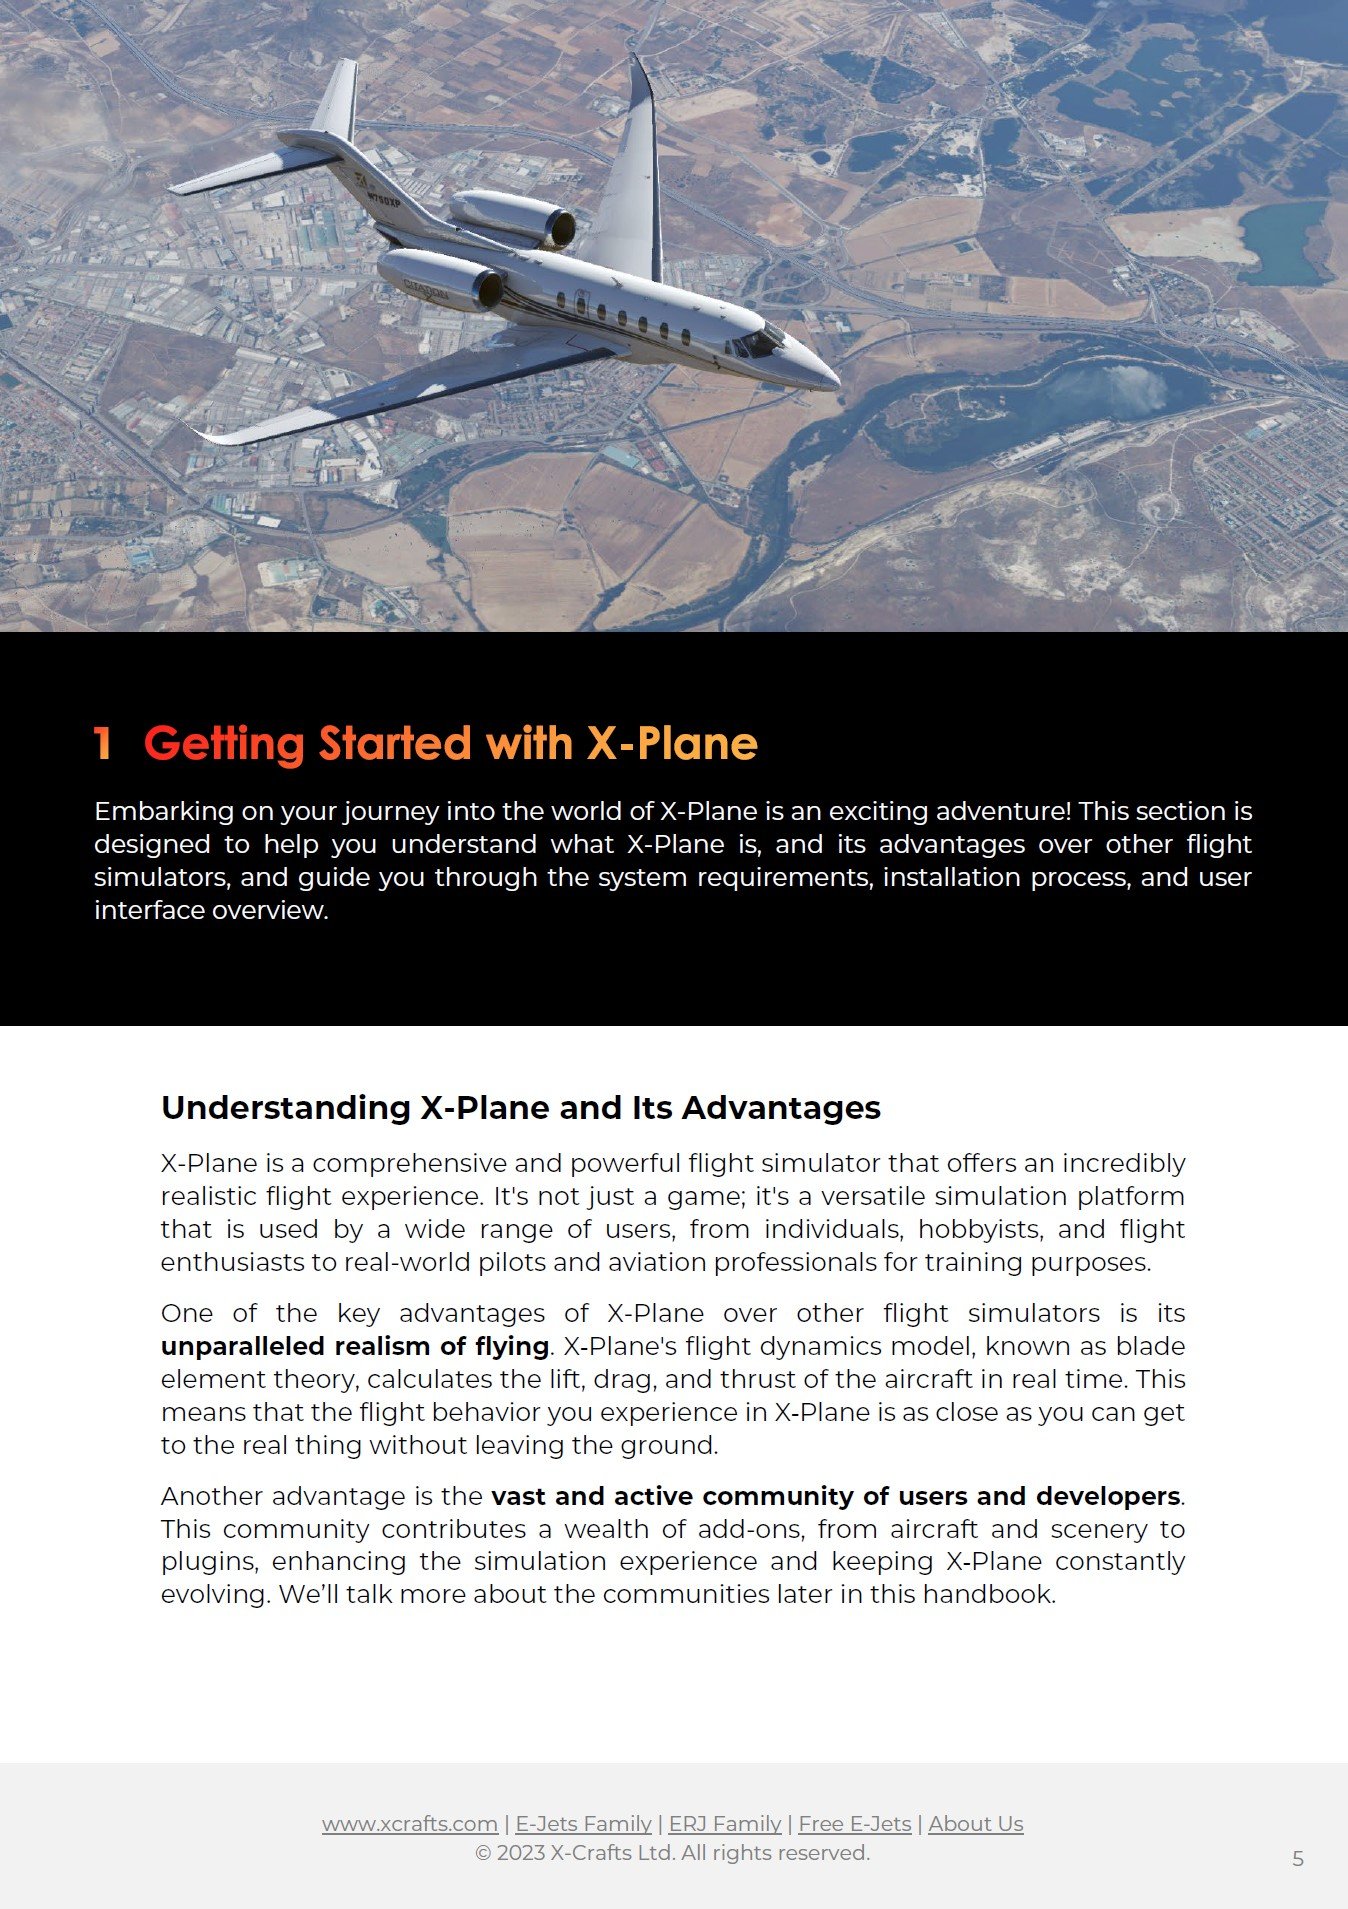 X-Plane-Explained-Your-Free-Handbook-to-Learn-X-Plane-the-Easy-Way_02_Getting-Started-With-X-Plane.jpg